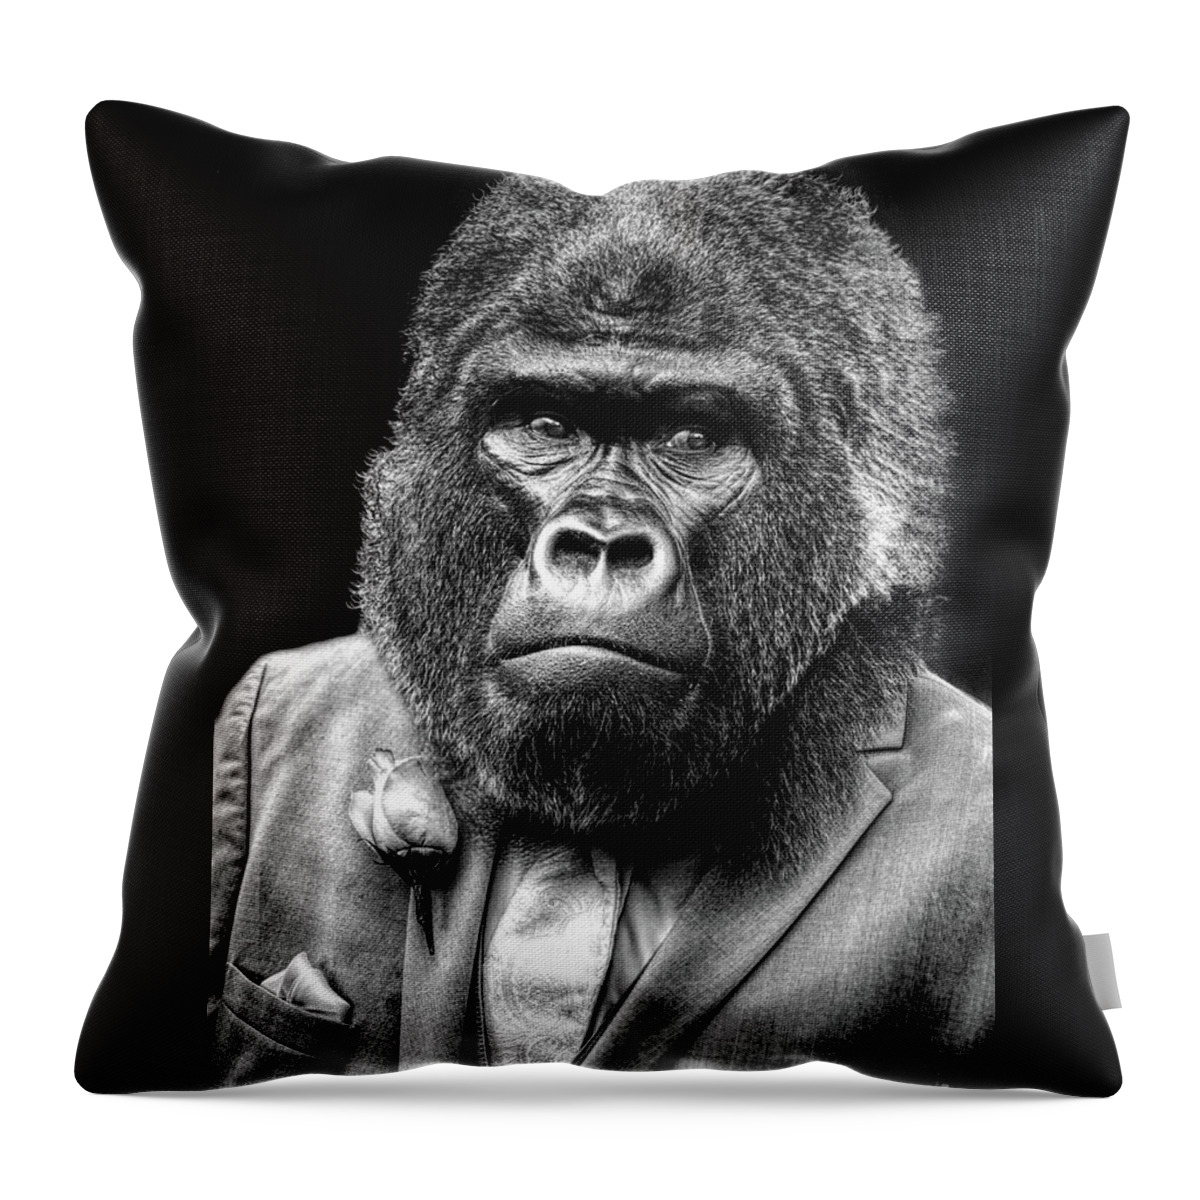 Wedding Throw Pillow featuring the photograph The Groom by Ed Taylor